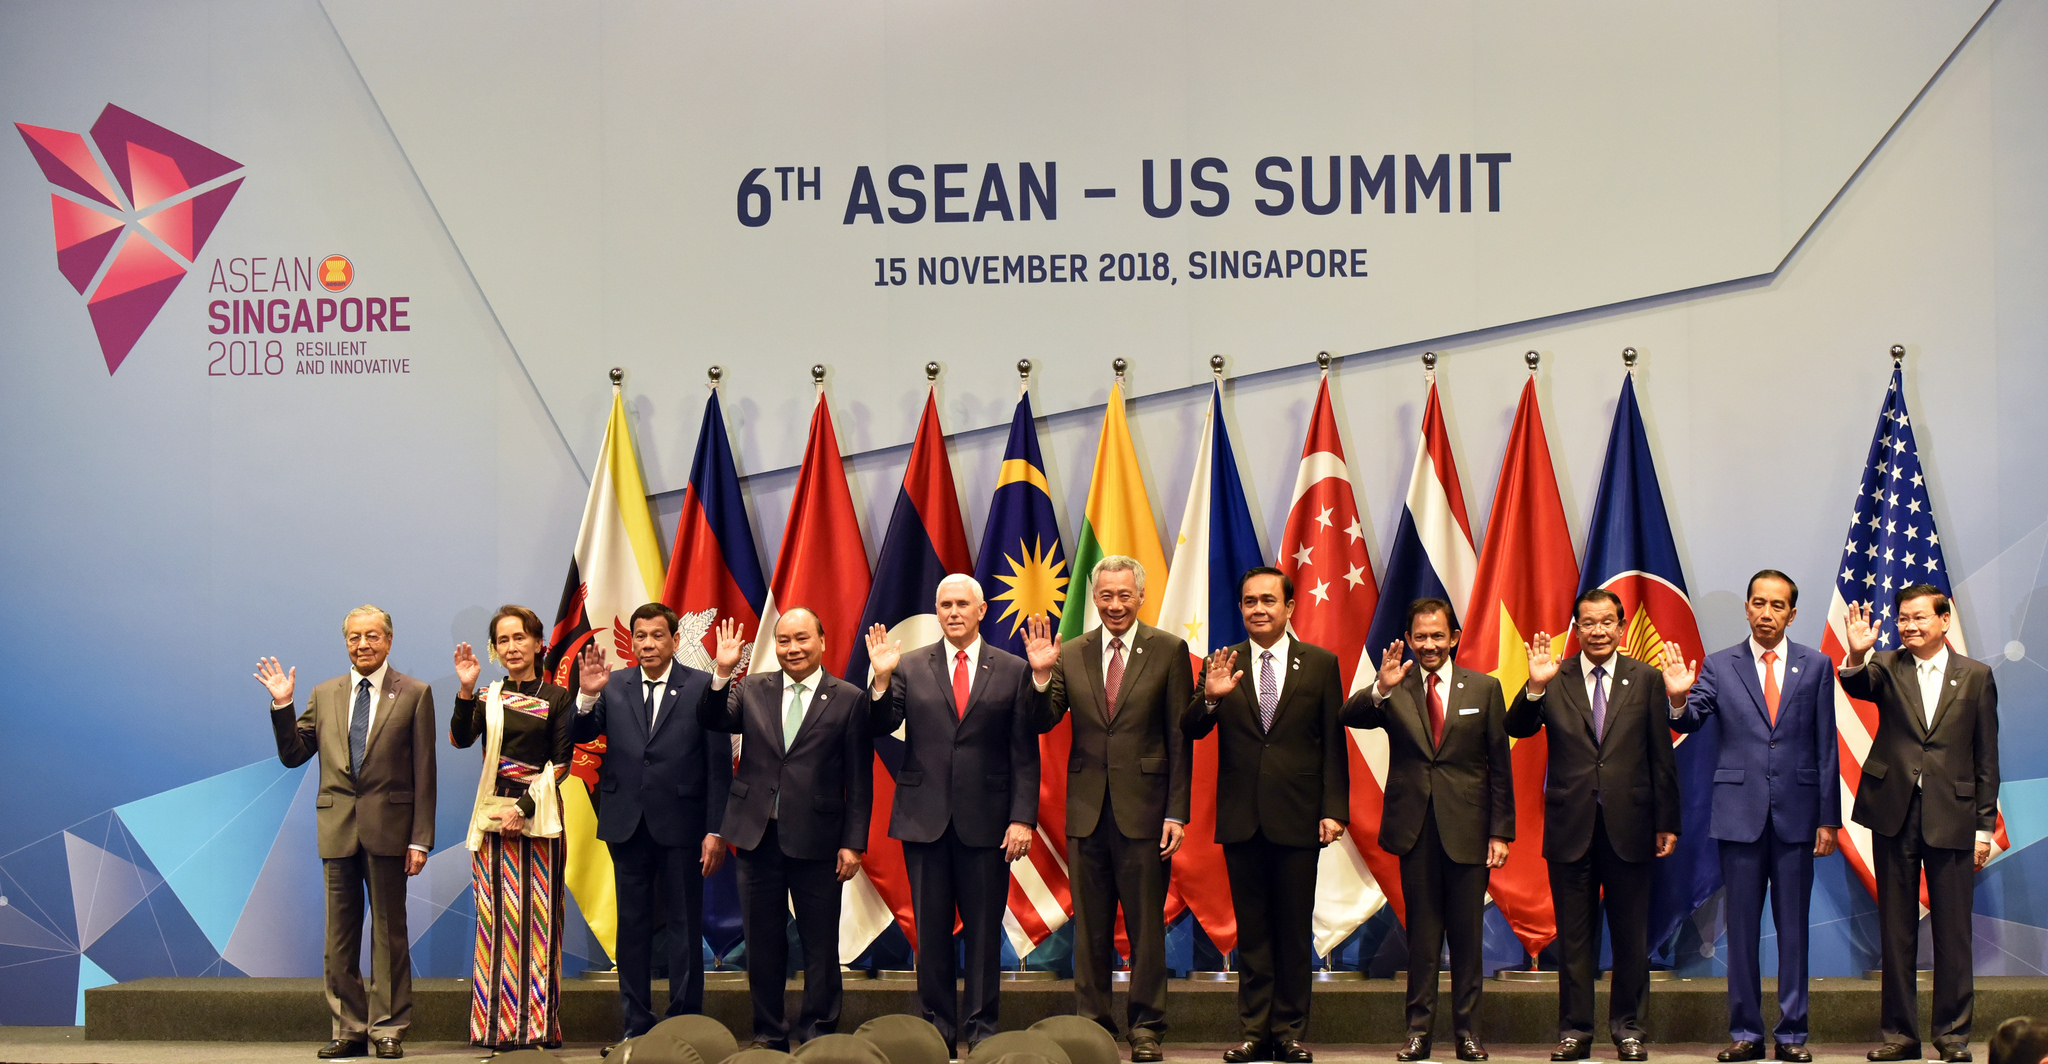 Chairman’s Statement of the 6th ASEANUnited States Summit ASEAN Main Portal